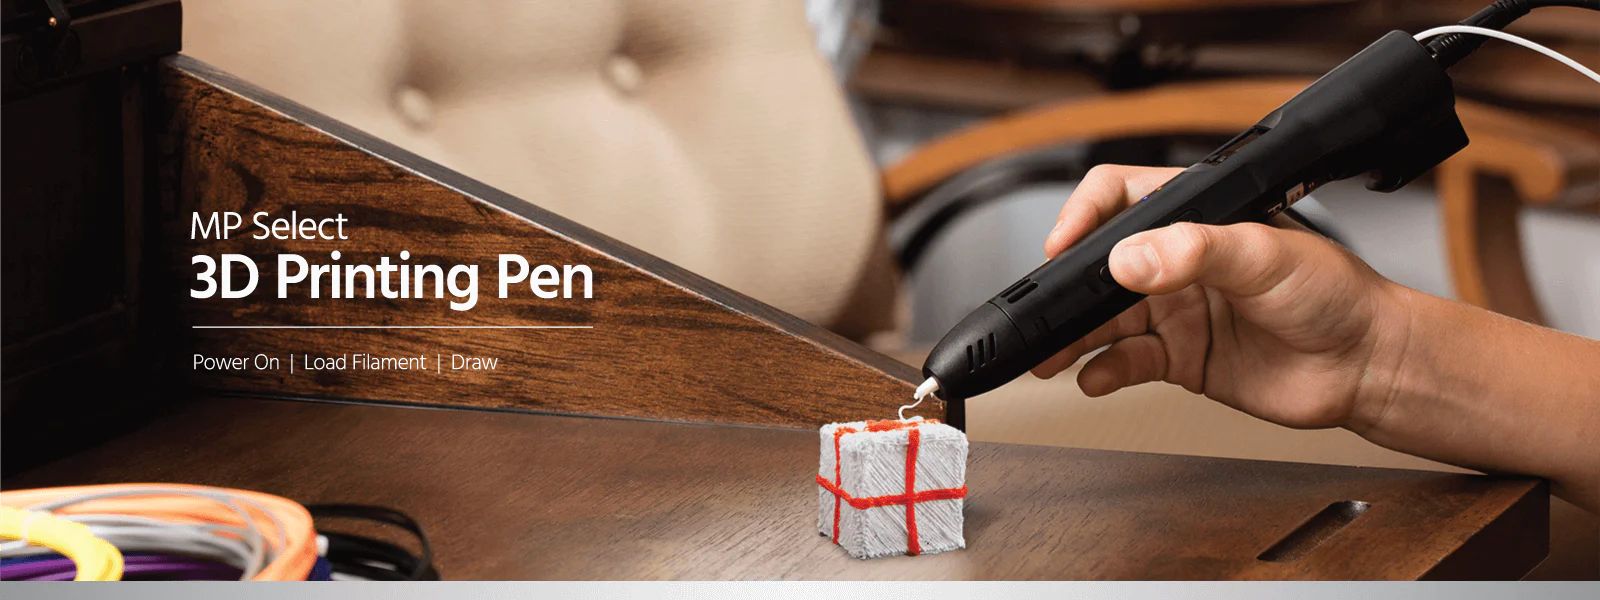 15-best-mp-select-3d-printing-pens-with-low-temp-safe-mode-pla-mode-for-2023